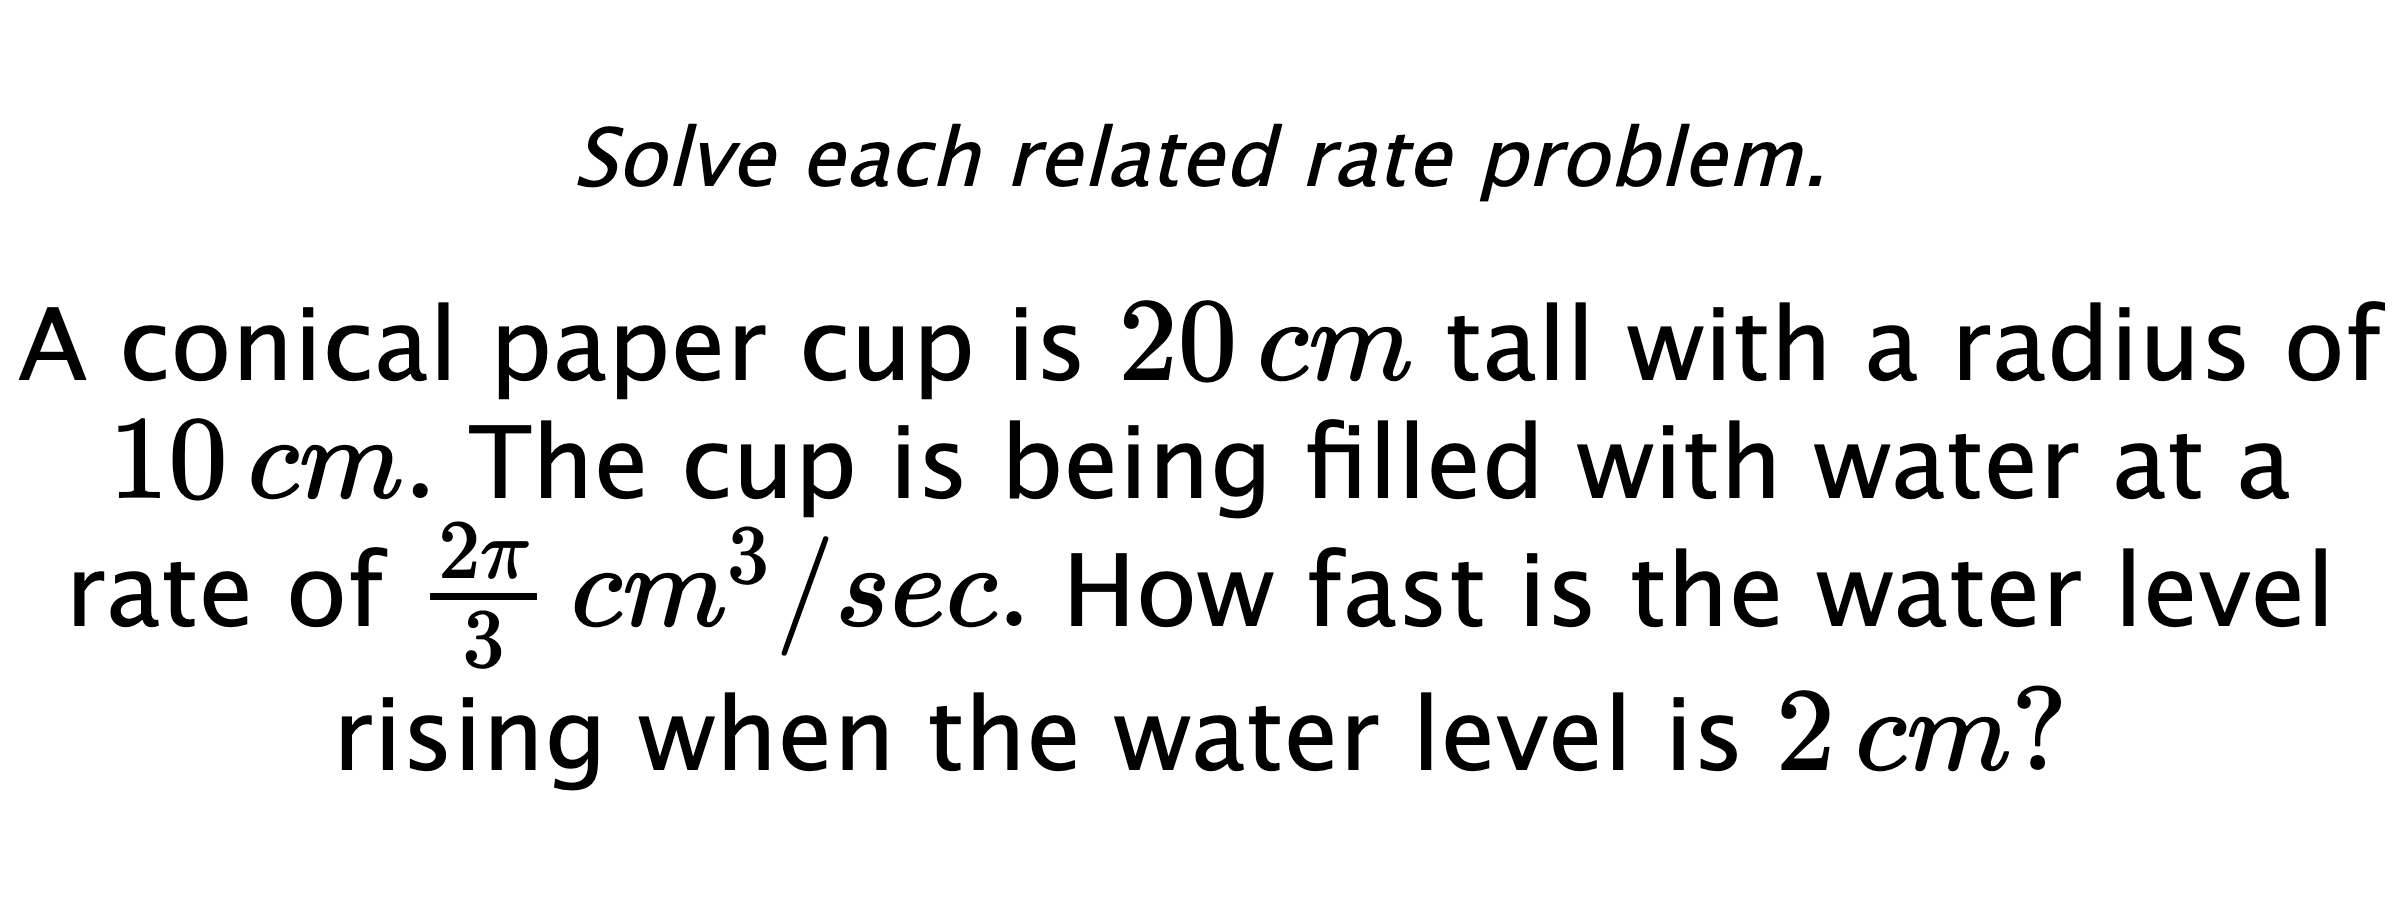 Solve each related rate problem. A conical paper cup is $20\,cm$ tall with a radius of $10\,cm.$ The cup is being filled with water at a rate of $\frac{2\pi}{3} \,cm^{3}/sec.$ How fast is the water level rising when the water level is $2\,cm?$